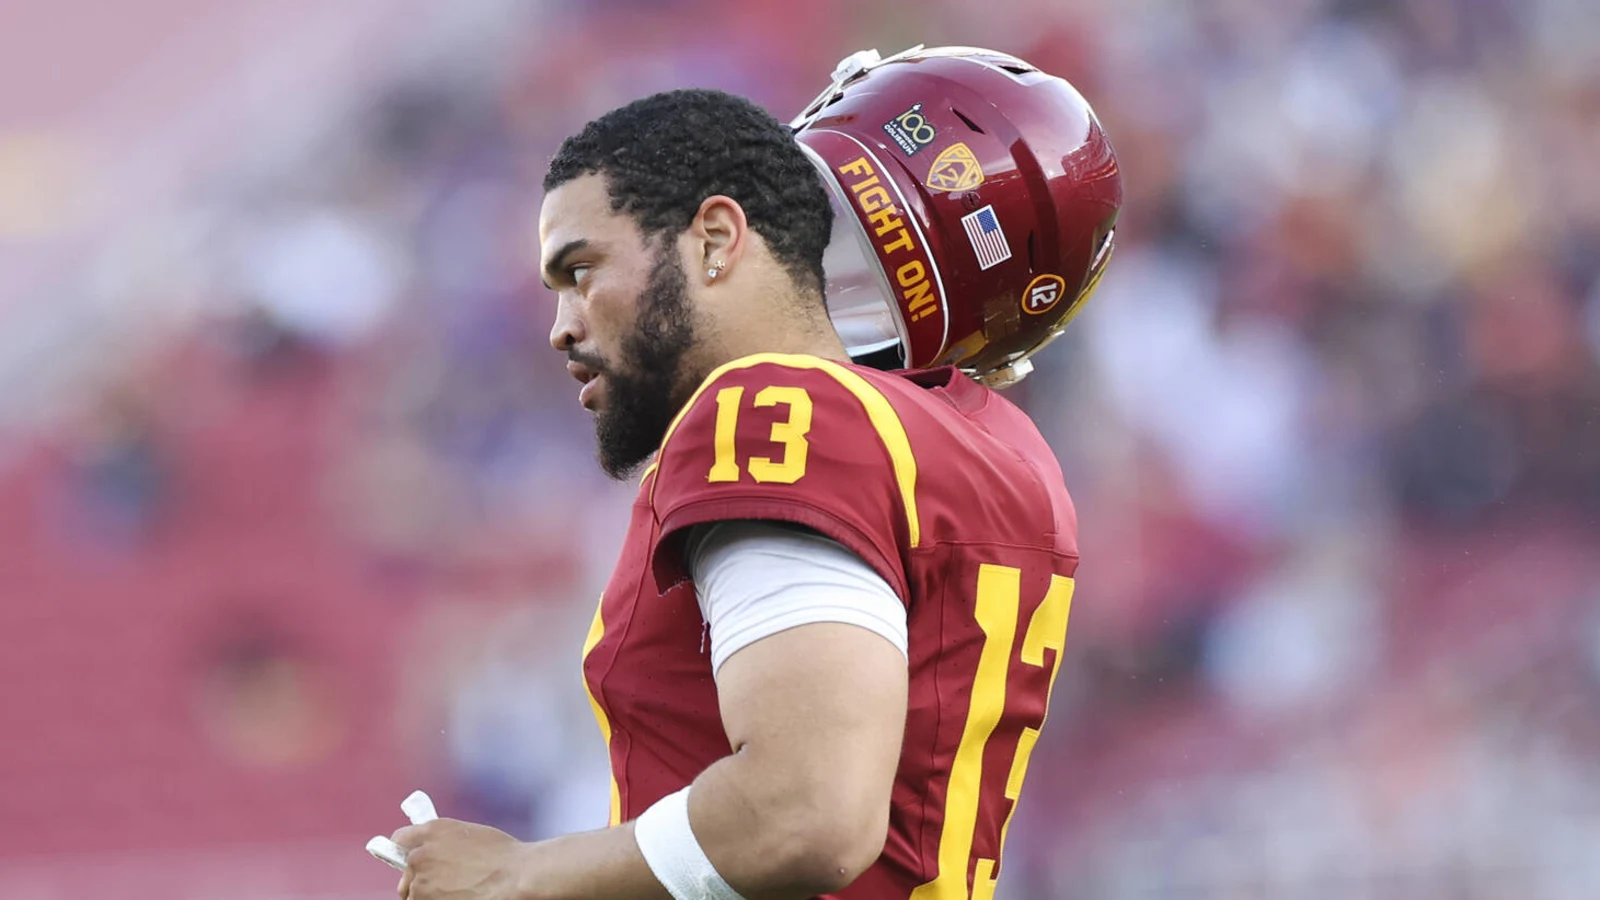 Is Caleb Williams Ready for the NFL? Doubts Loom as USC Star Heads to Draft Amid Emotional Concerns